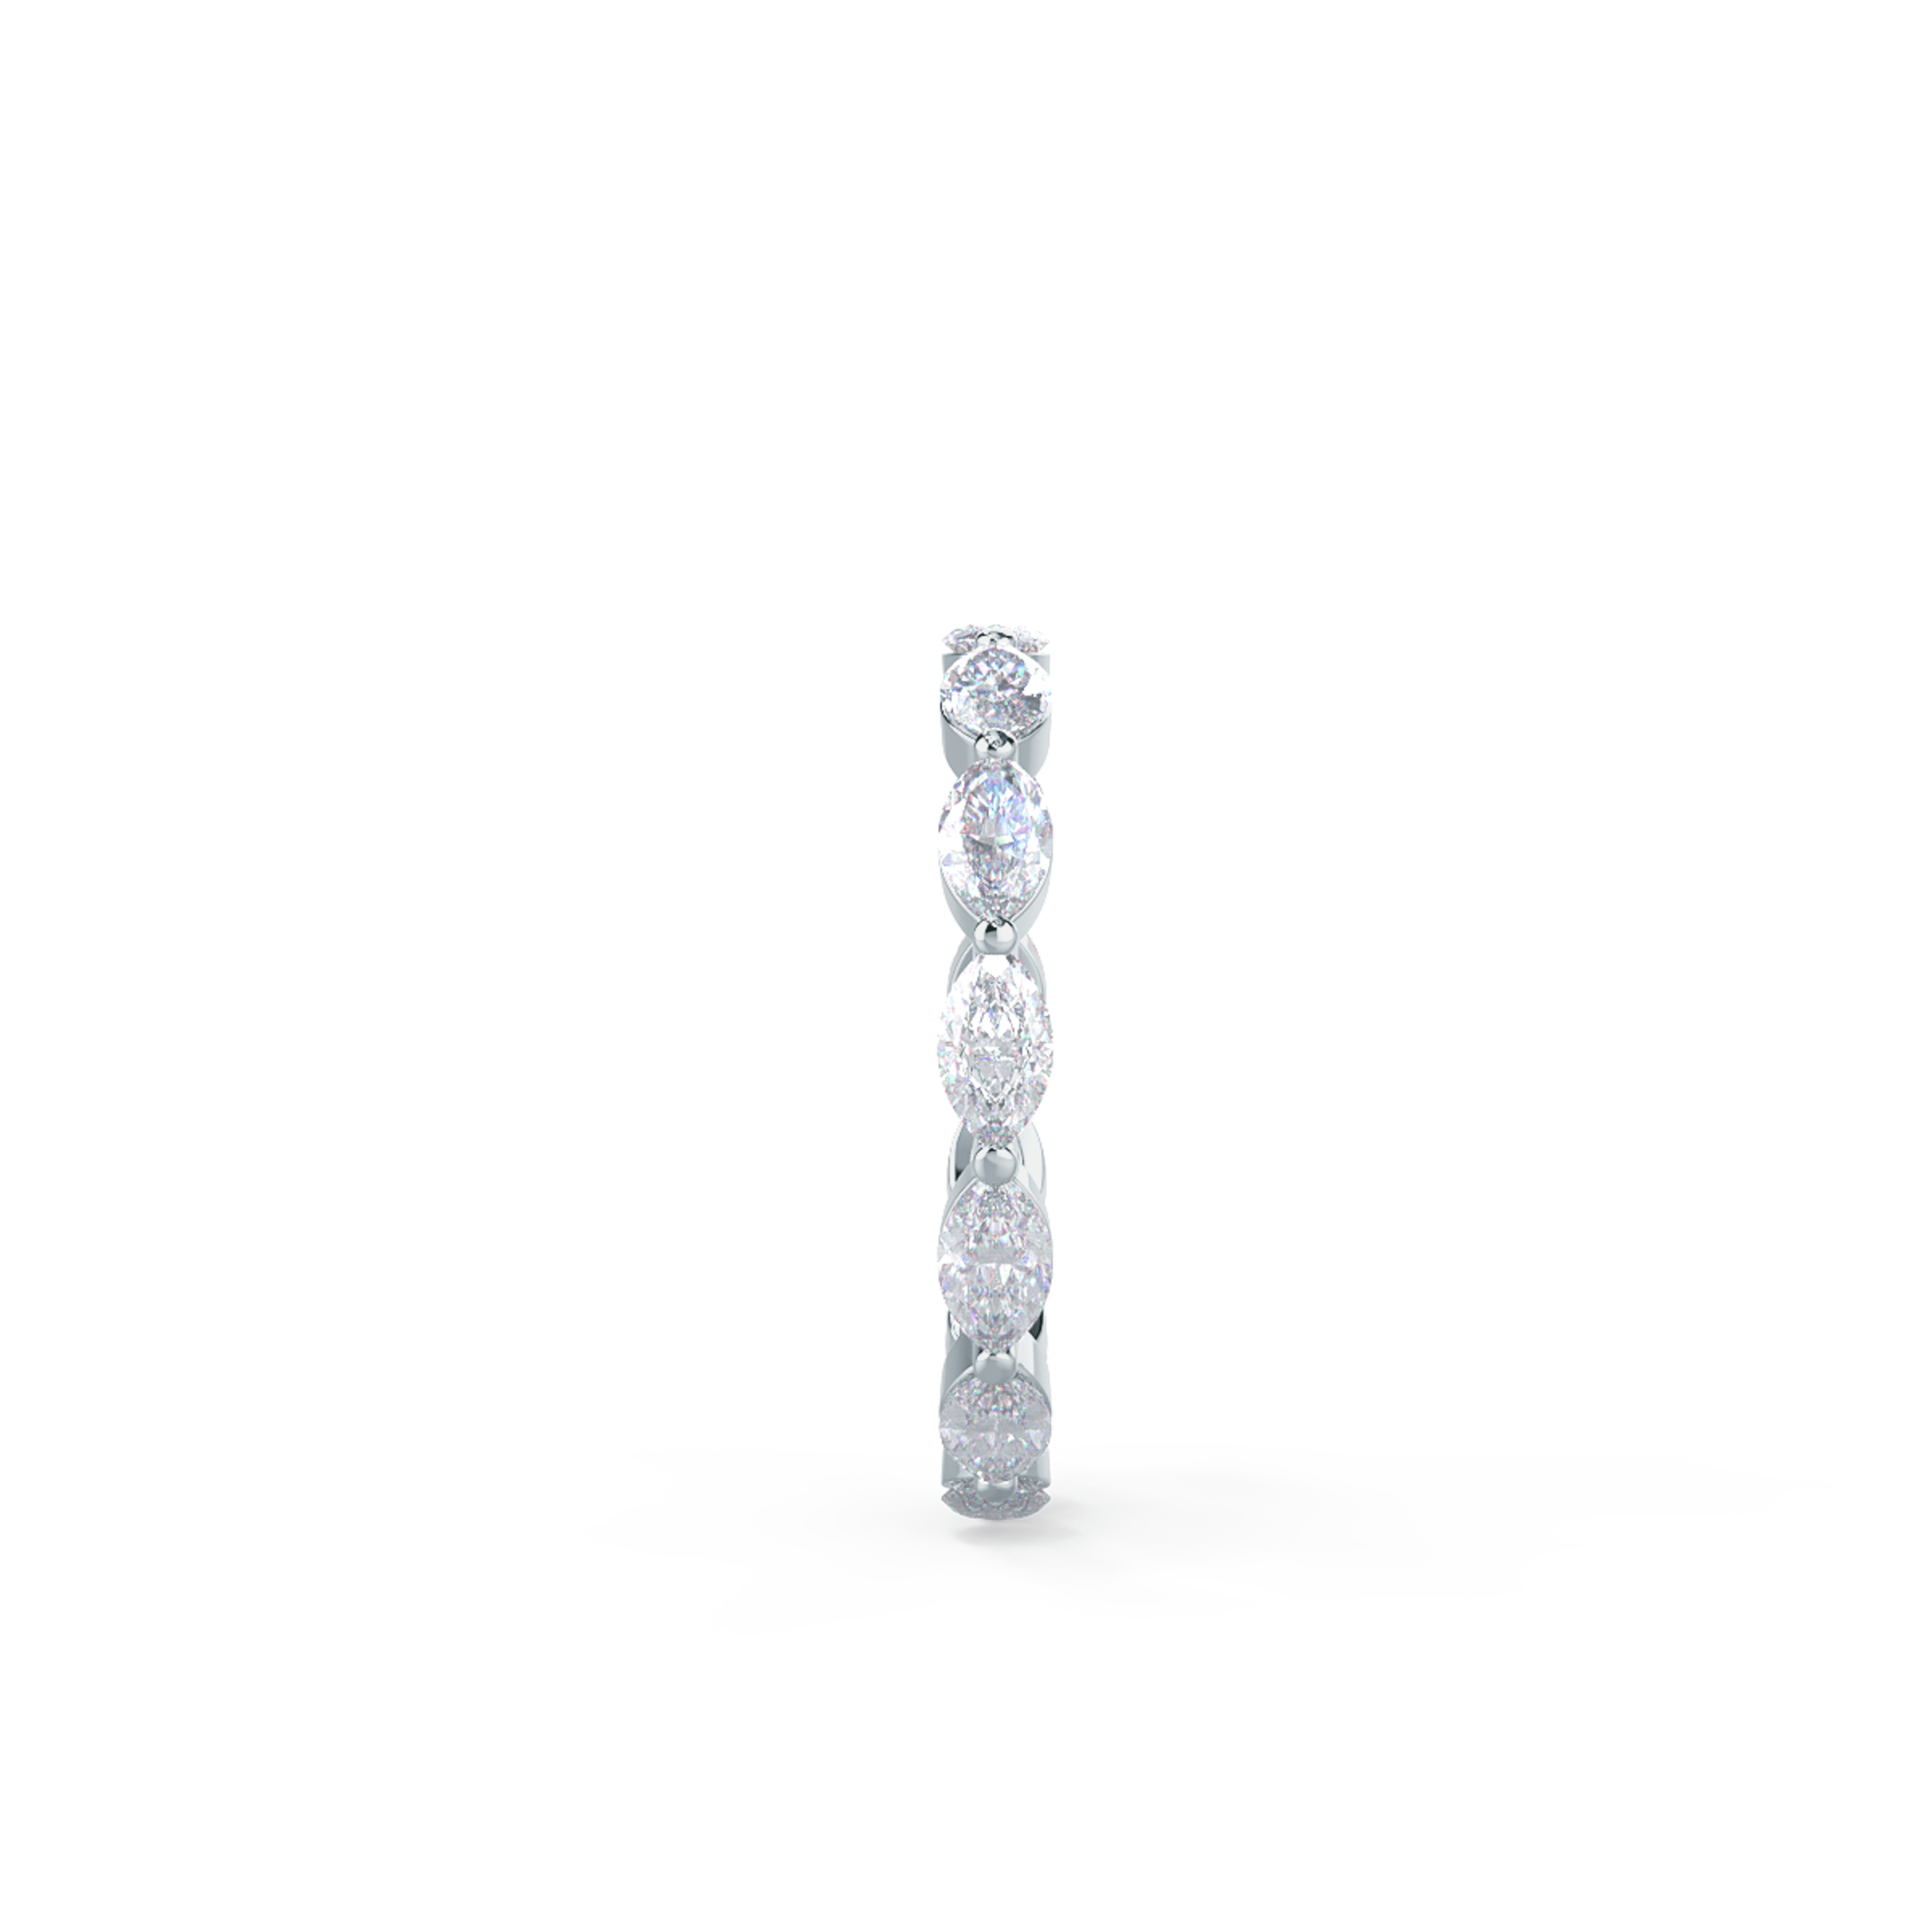 Exceptional Quality 1.3 ct Diamonds set in 18k White Gold Marquise Diamond East-West Eternity Band (Side View)